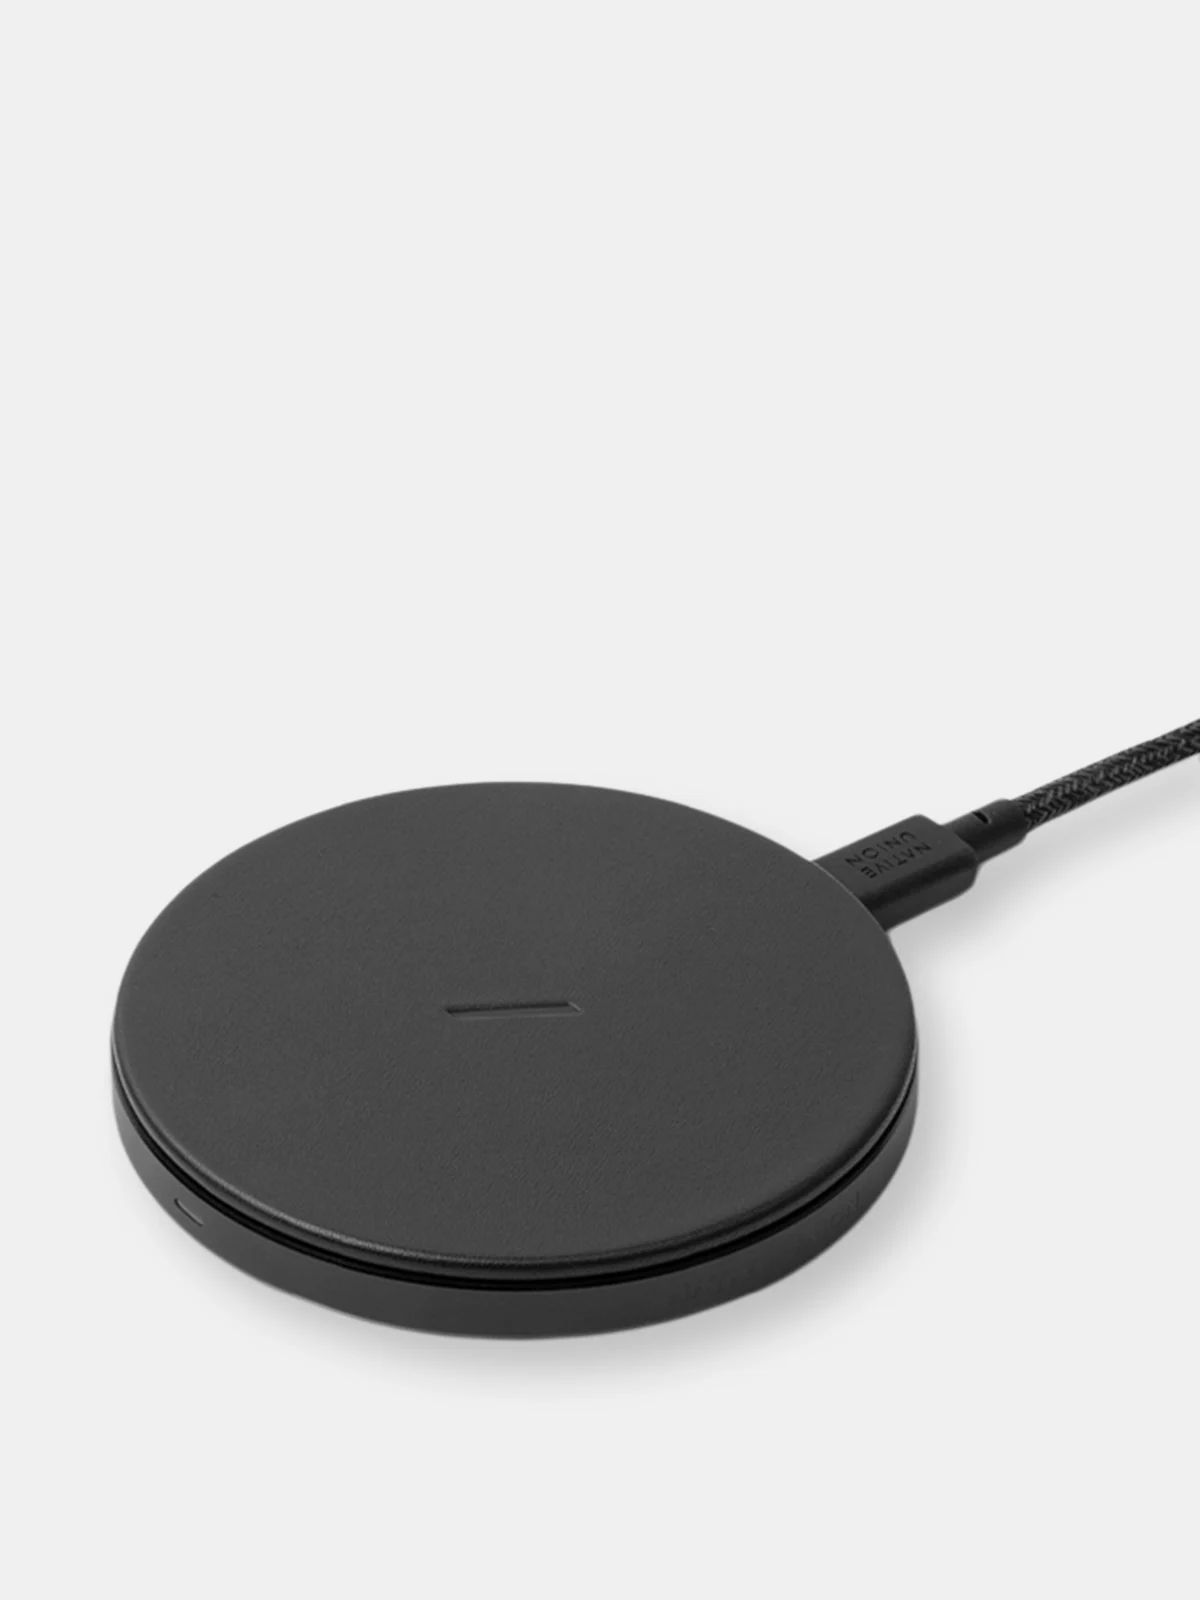 Native Union Drop Classic Leather Wireless Charger | Verishop